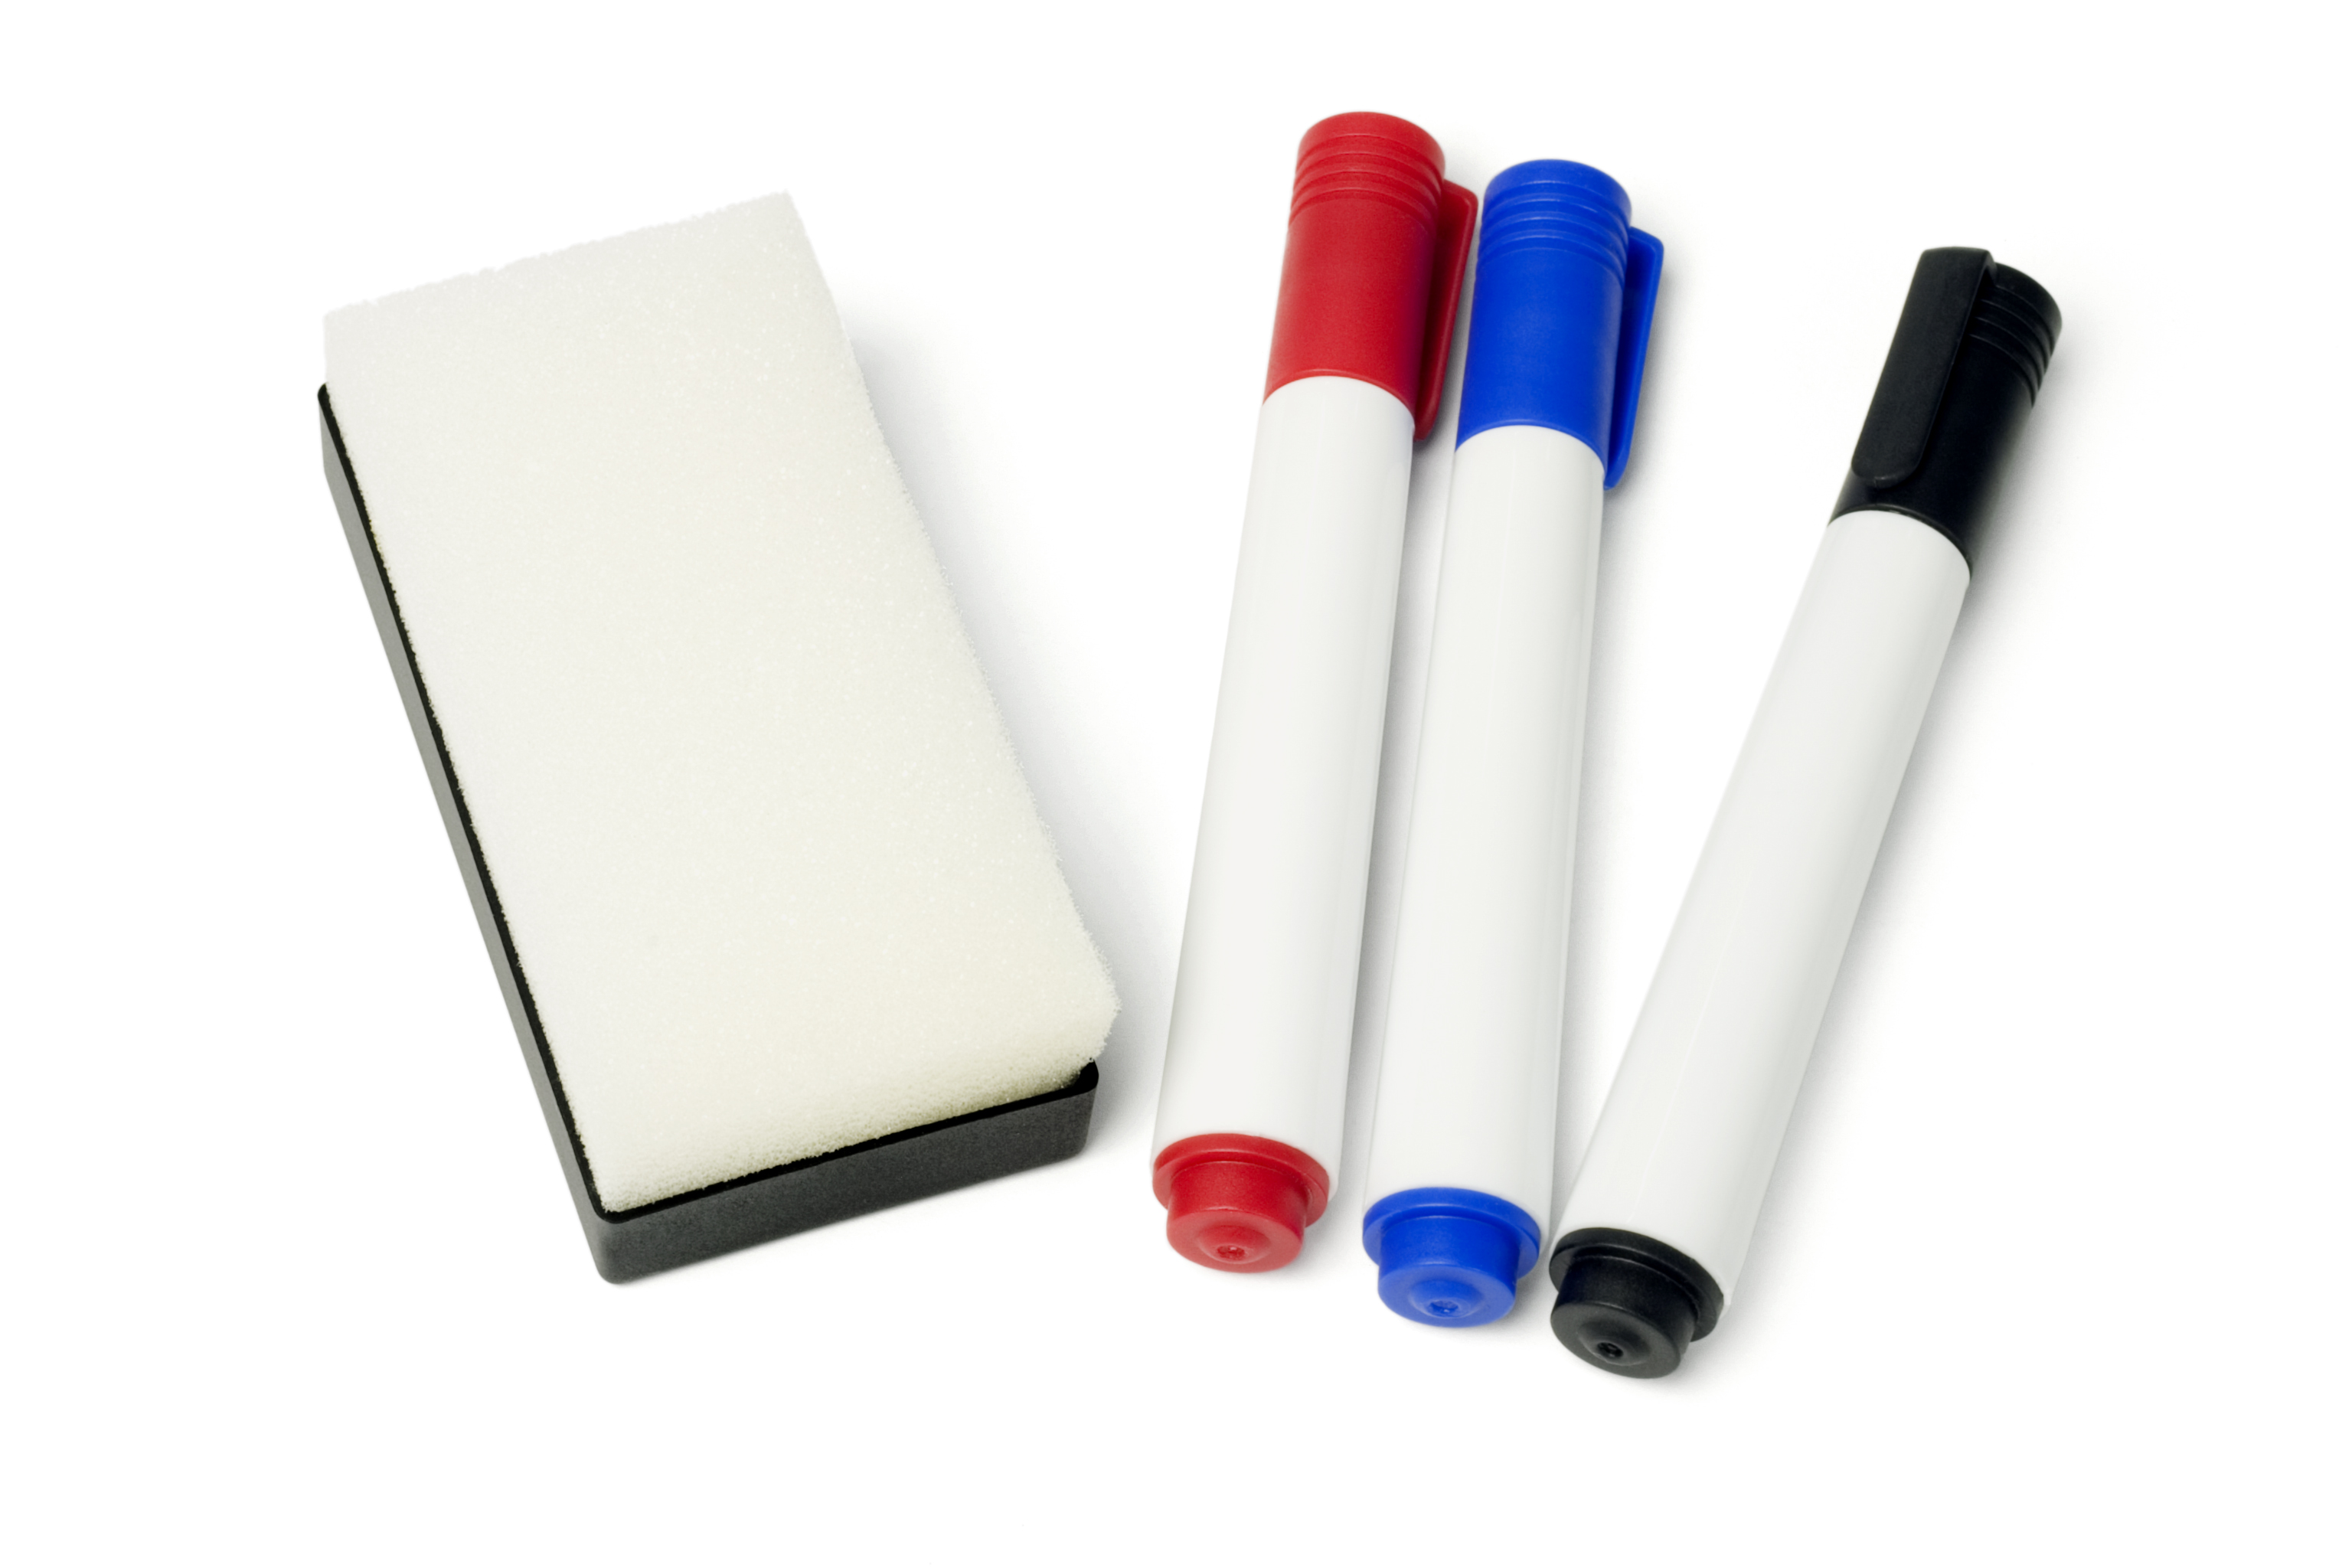 Dry erase markers and eraser